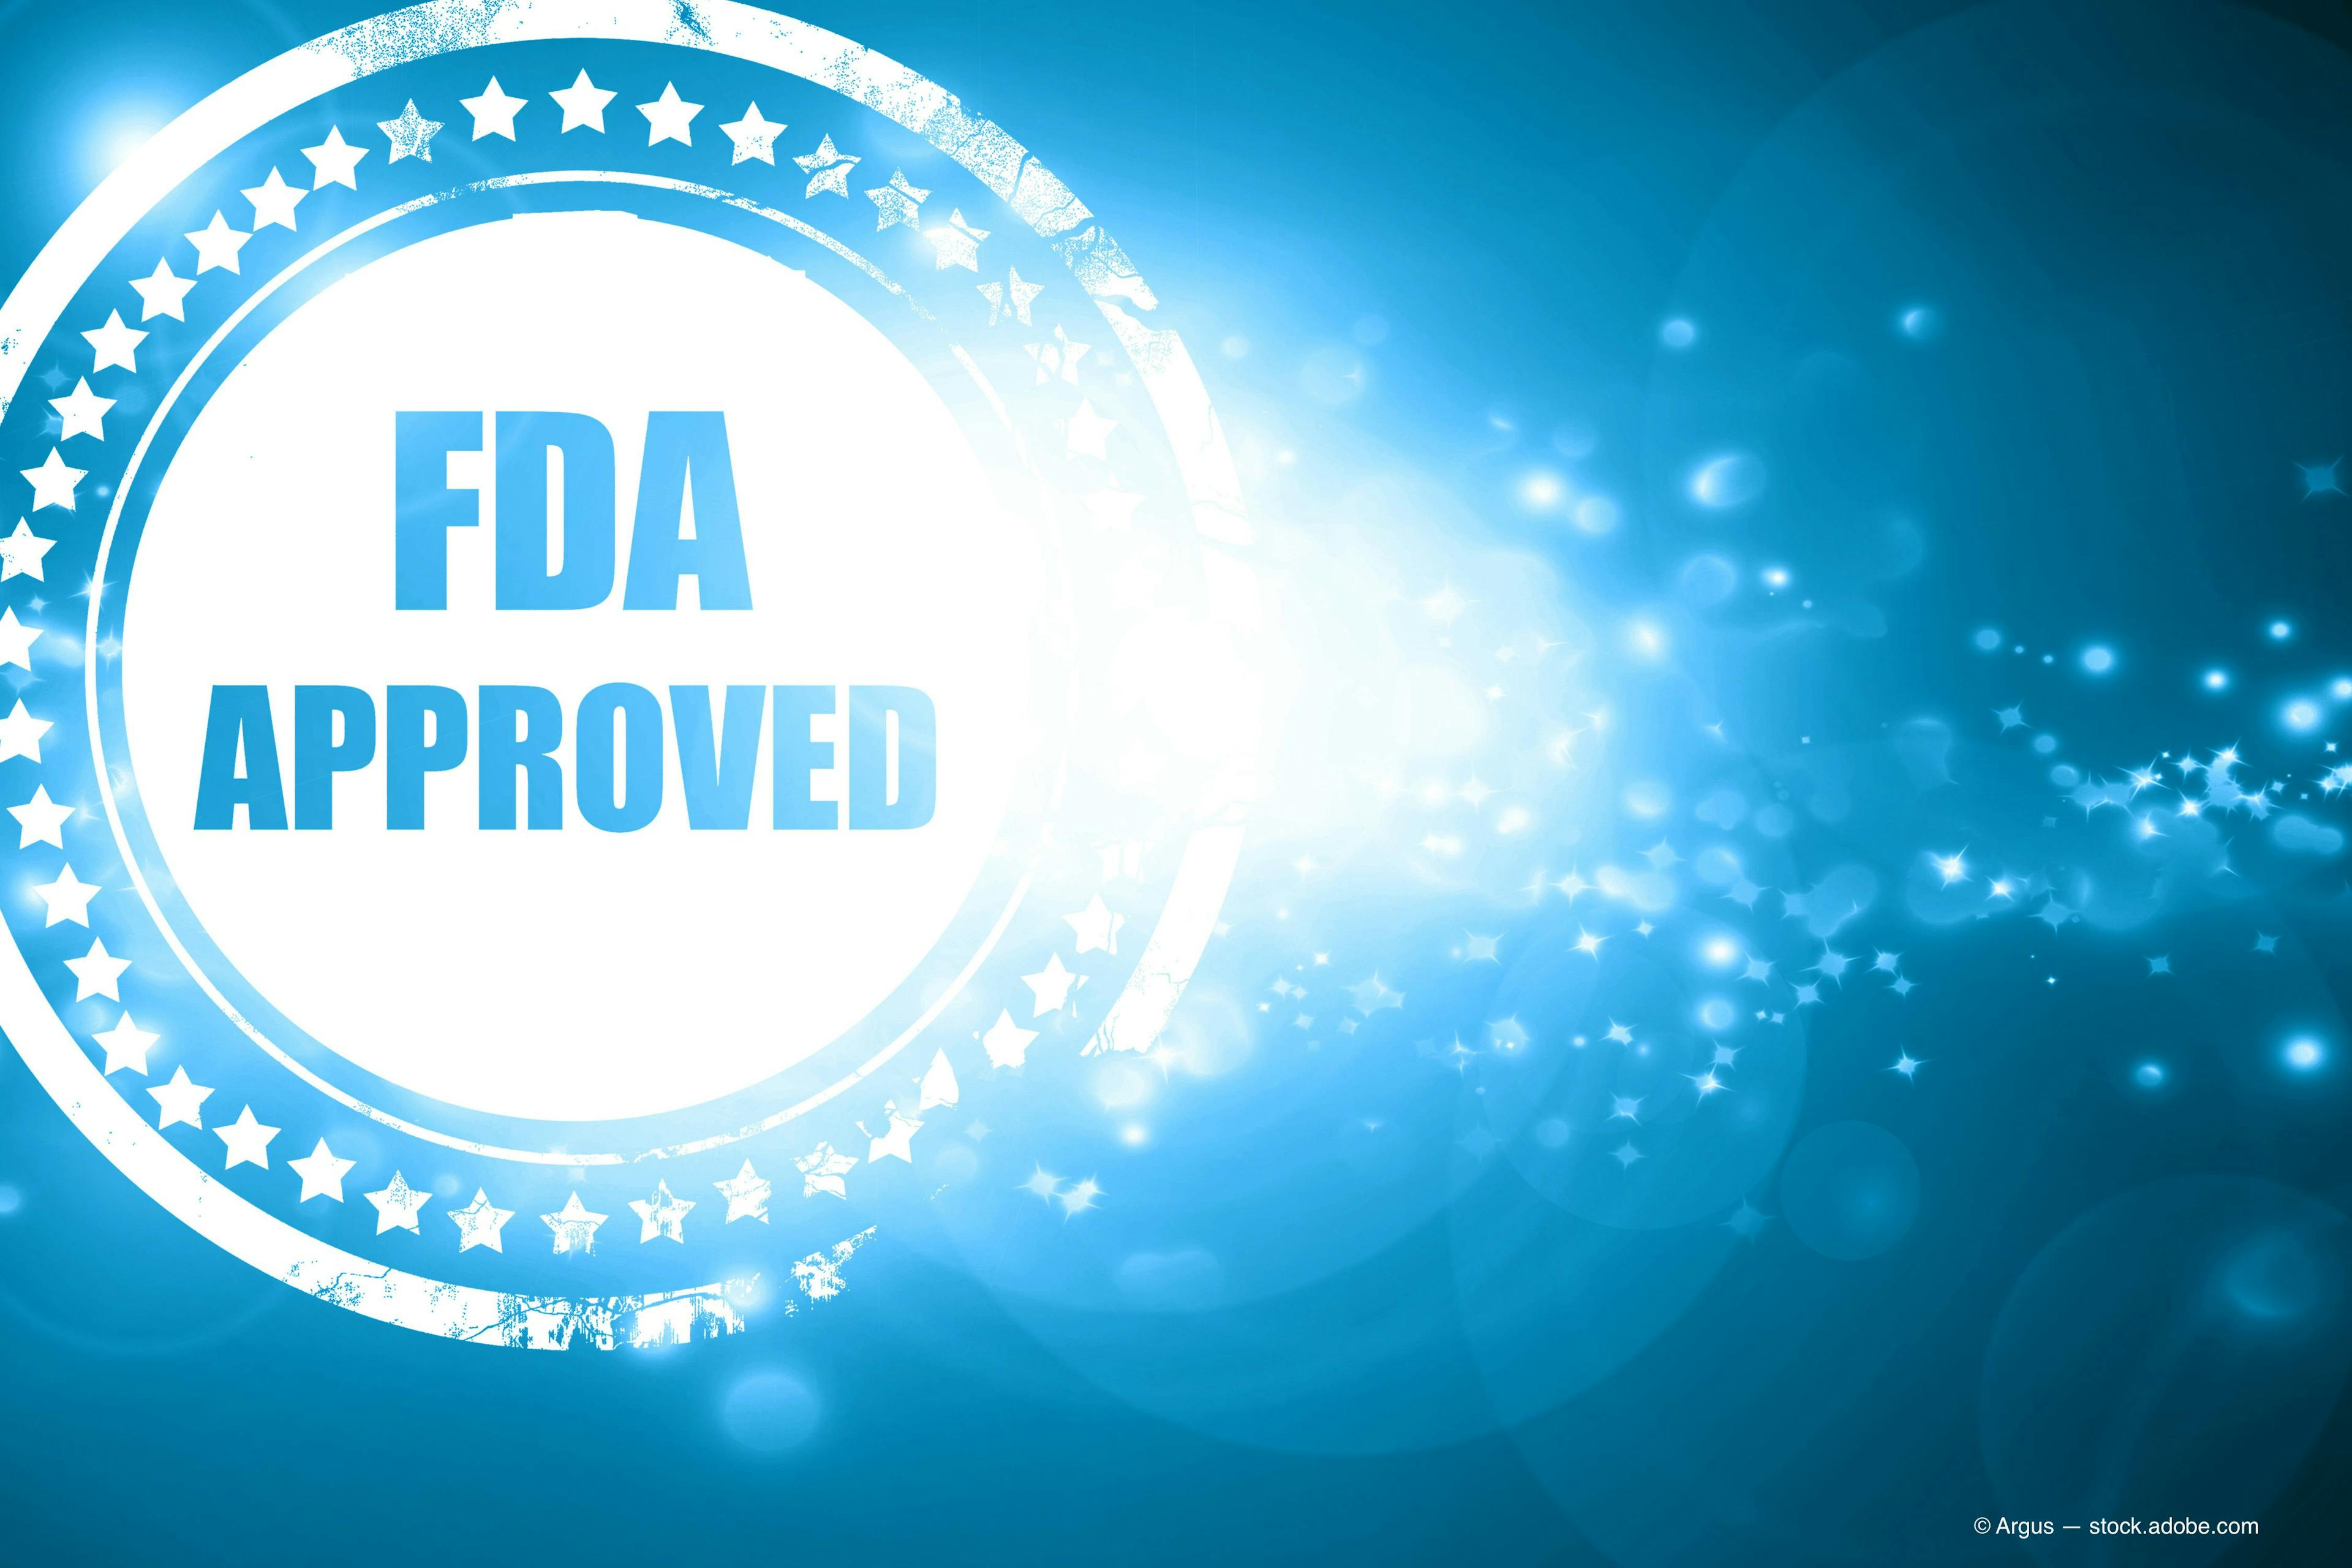 Oyster Point Pharma, Inc. announced Monday that the U.S. FDA has granted approval of its TYRVAYA (varenicline solution) nasal spray 0.03 mg for the treatment of dry eye disease (DED), making it the first — and only — nasal spray approved for DED treatment in the U.S